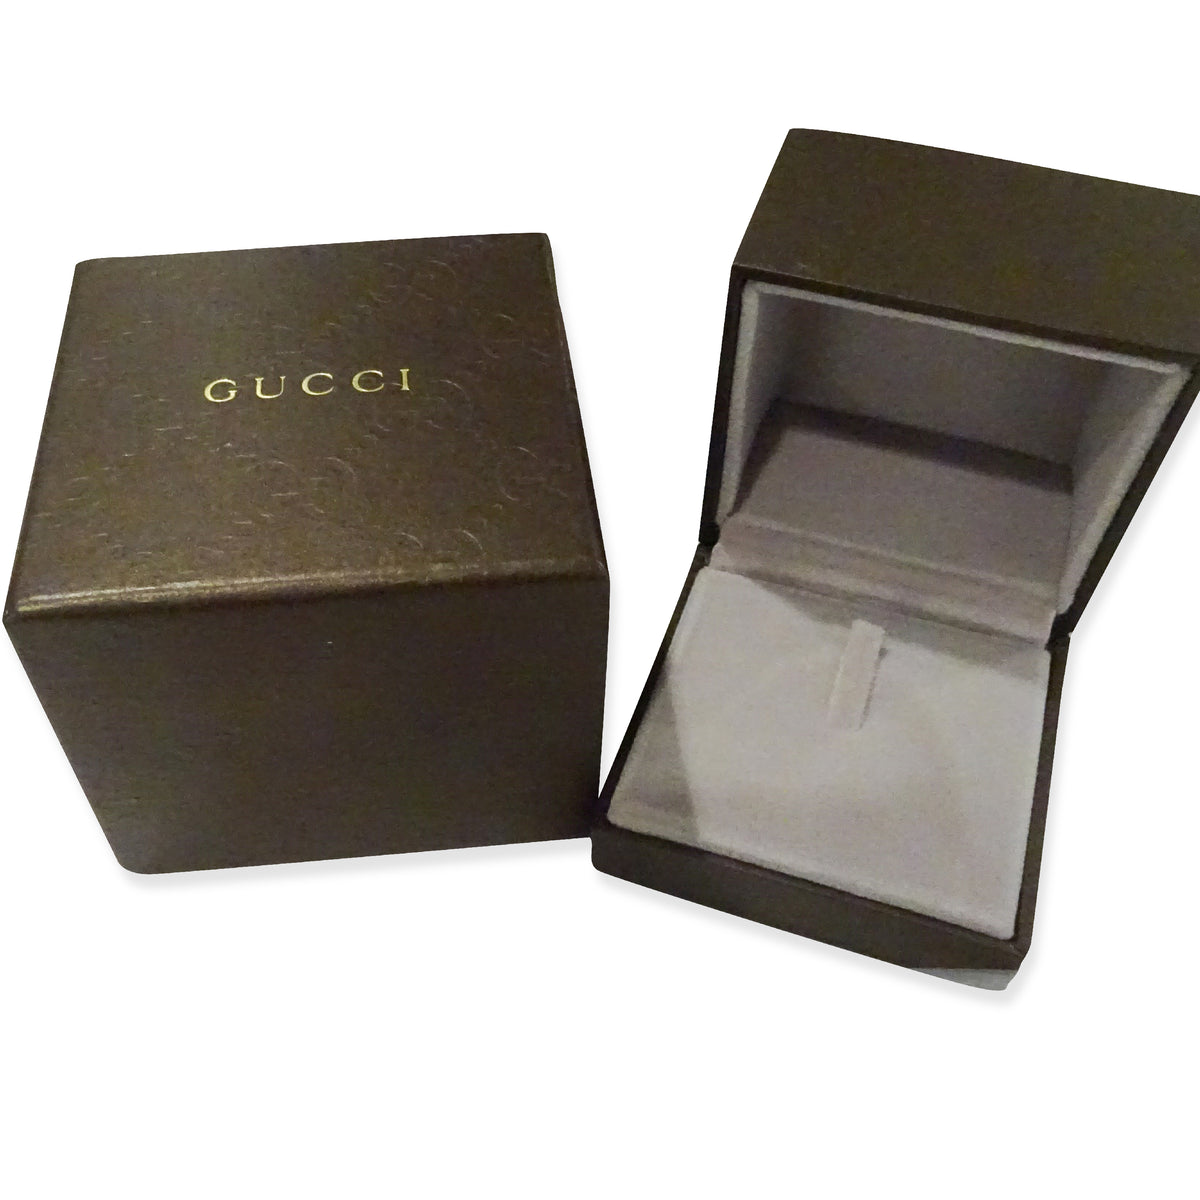 Gucci Double G Diamond Ring in 18K White Gold 0.10 CTW